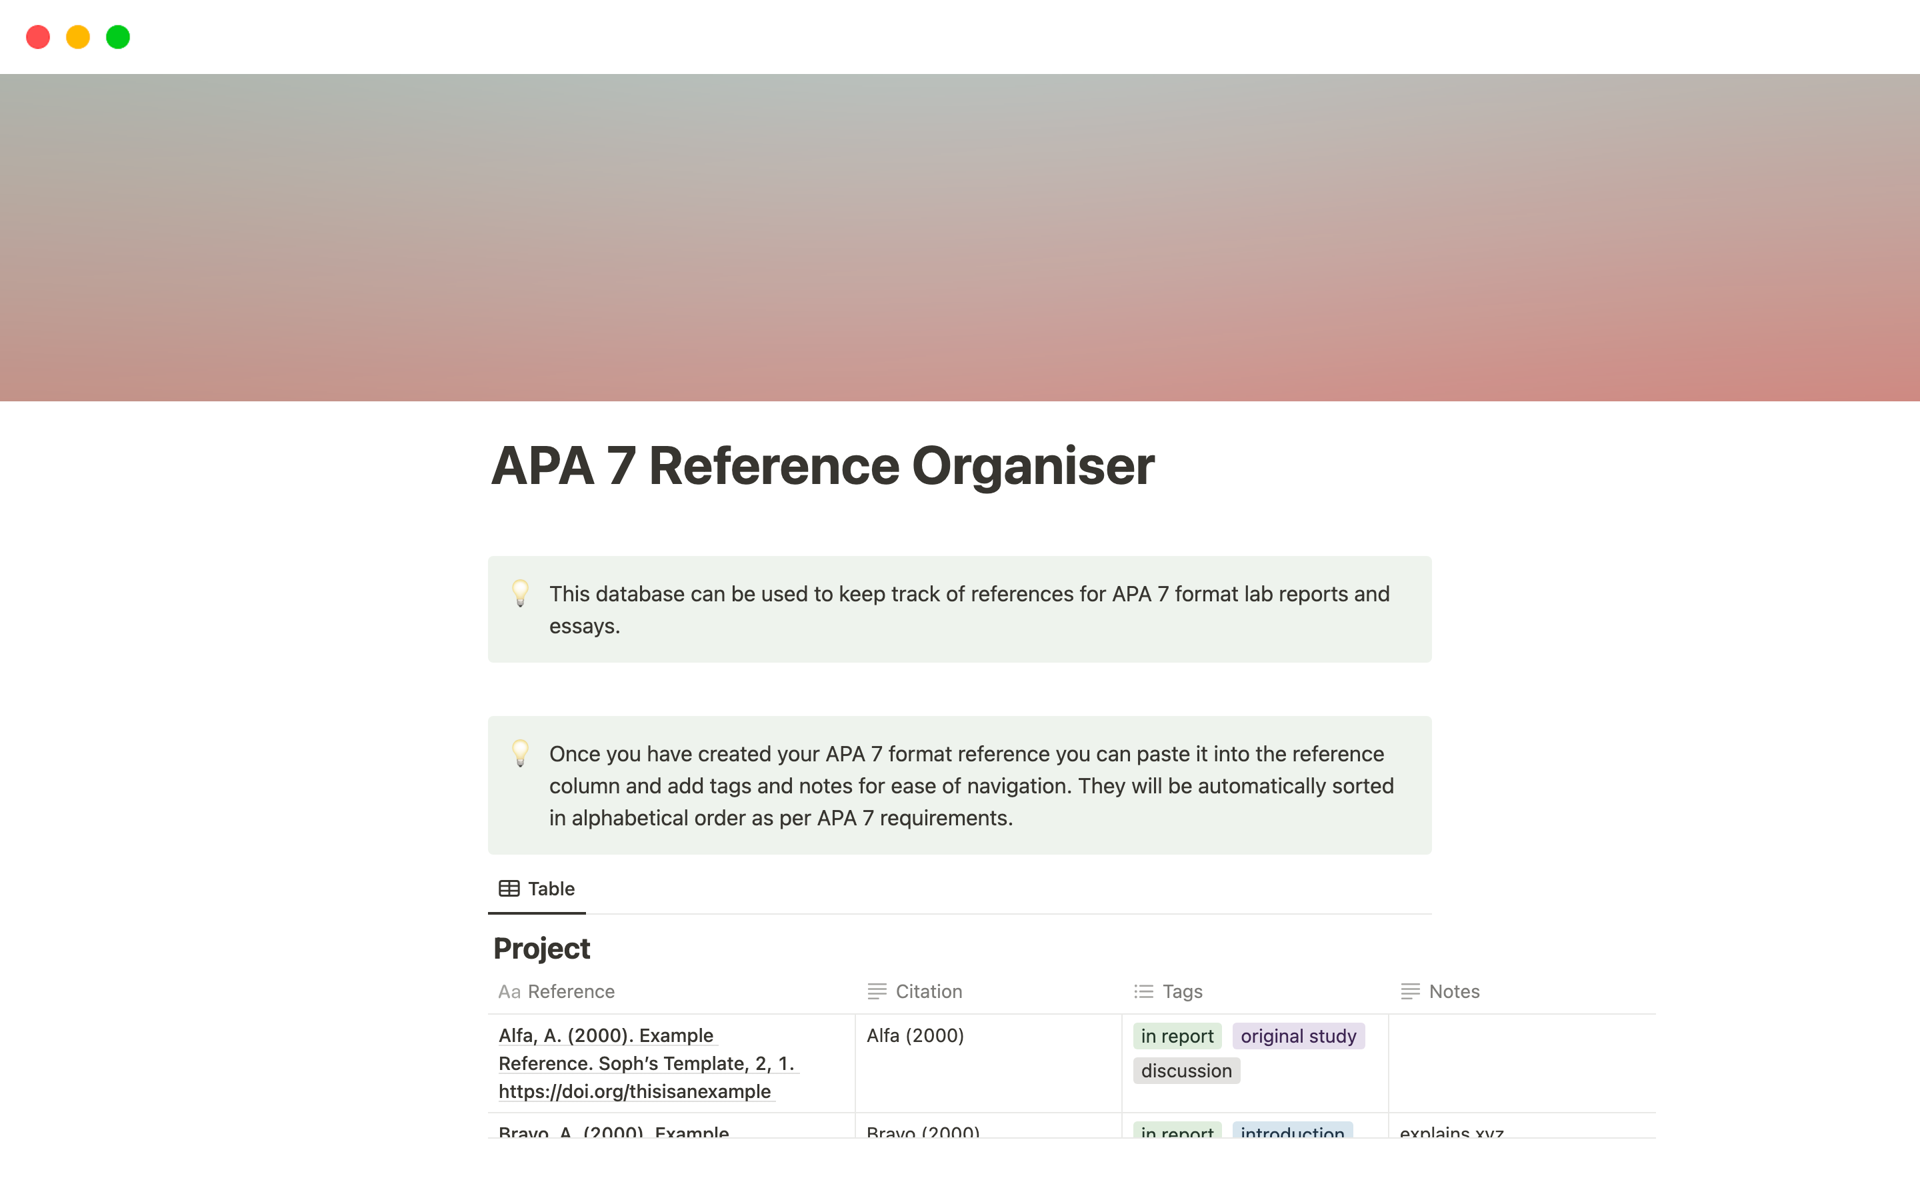 This template is designed to make writing APA 7 format reports and essays easier by organising your references in alphabetical order and allowing you to annotate each one with relevant information